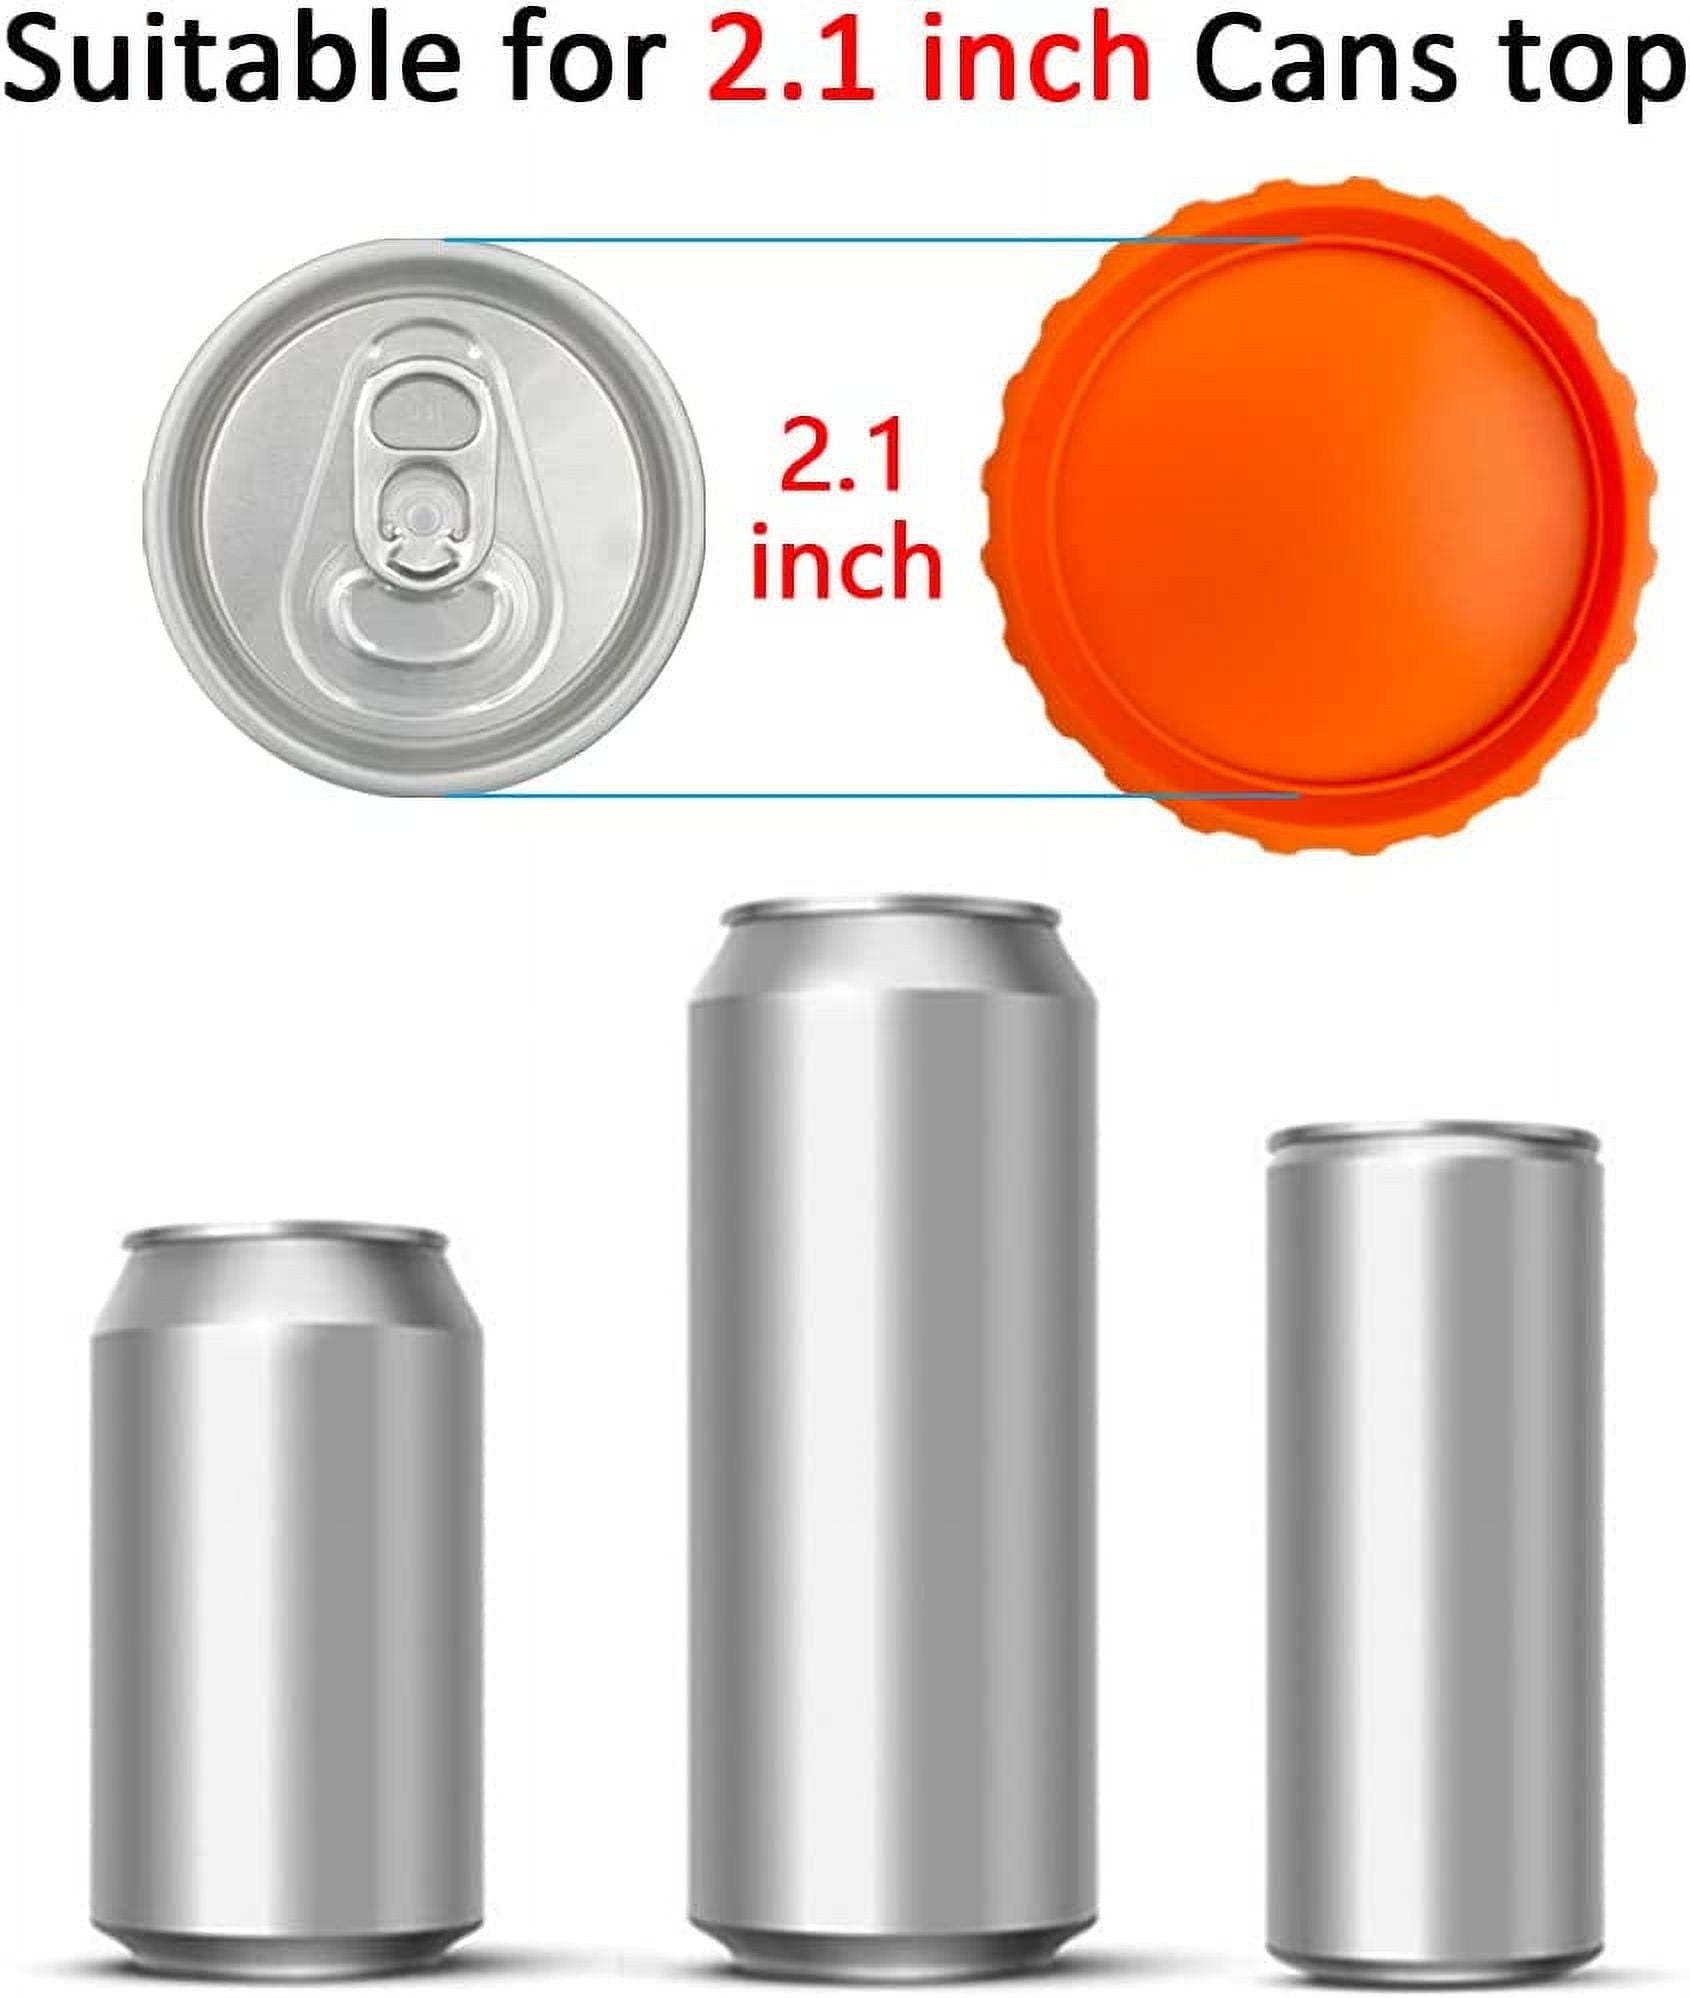 Silicone Soda Can Lids, 6Pack Reusable Soda/Beverage/Beer Can Lids, Can Covers, Can Caps, Can Topper, Can Saver, Can Stopper, Cans Mark, Fits